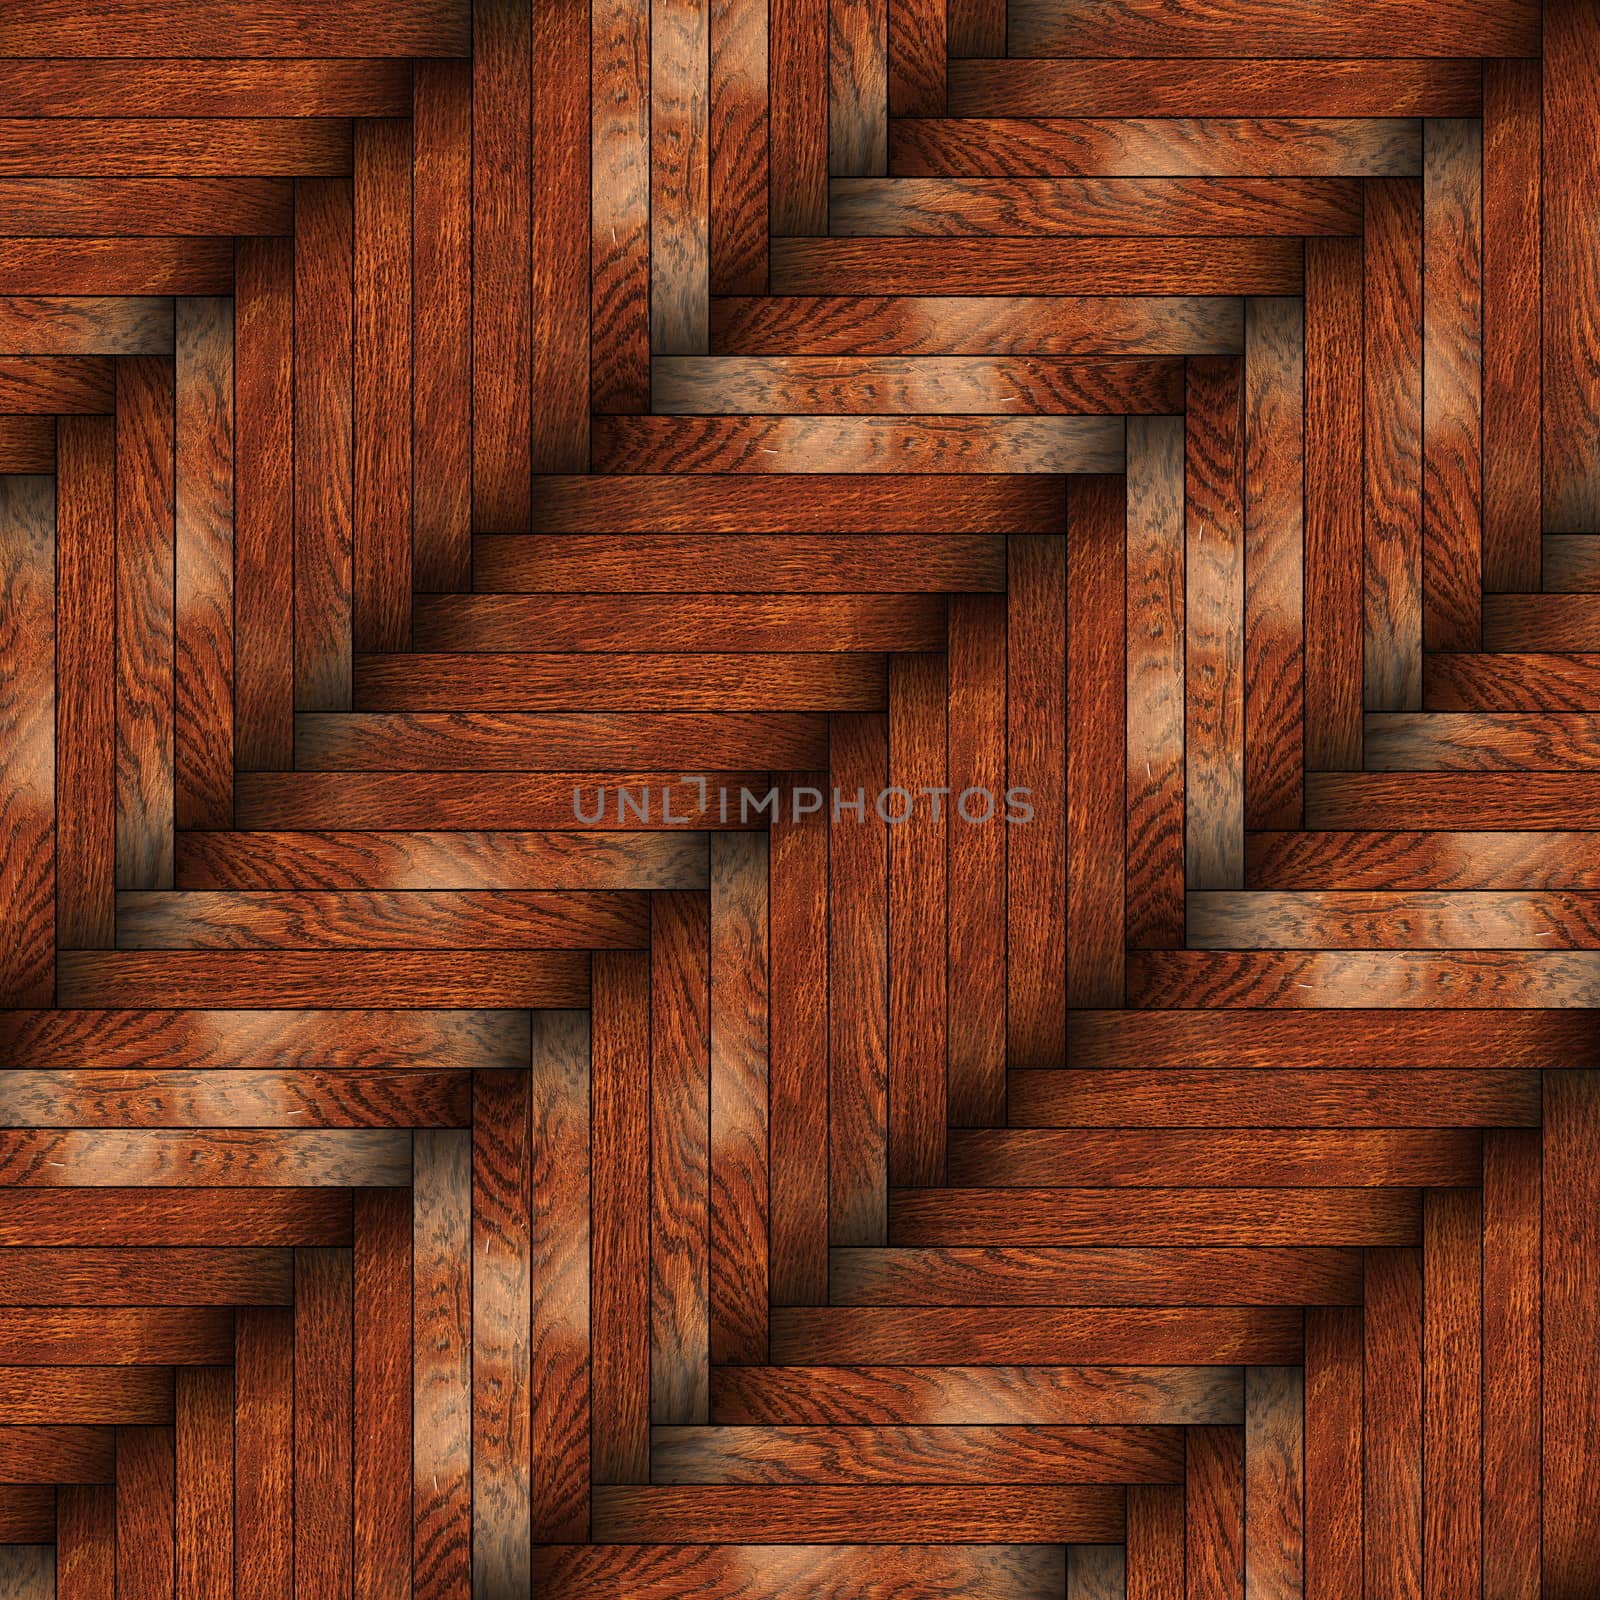 tiled wooden surface by taviphoto